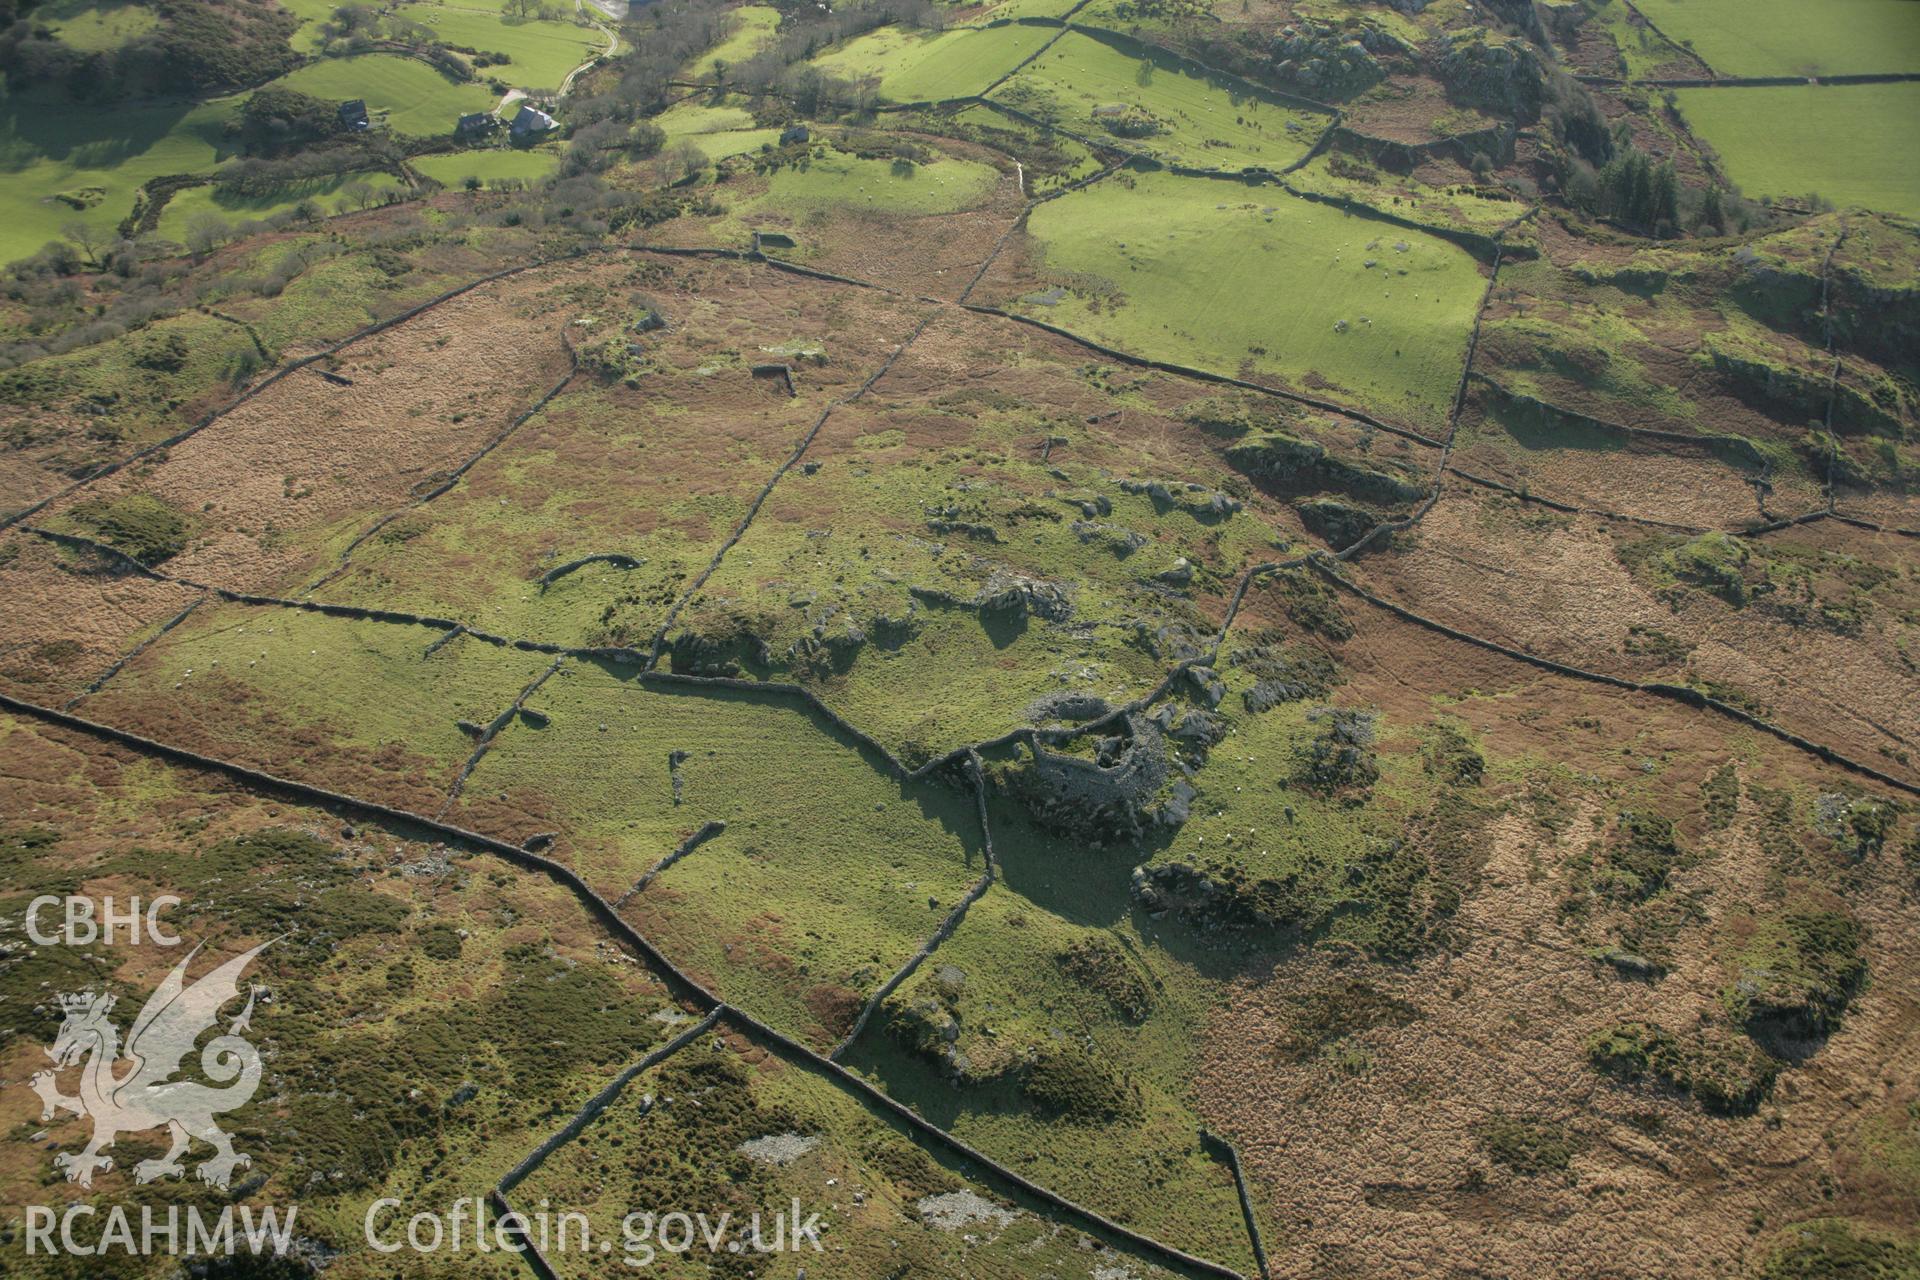 RCAHMW colour oblique aerial photograph of Castell Caerau. Taken on 25 January 2007 by Toby Driver